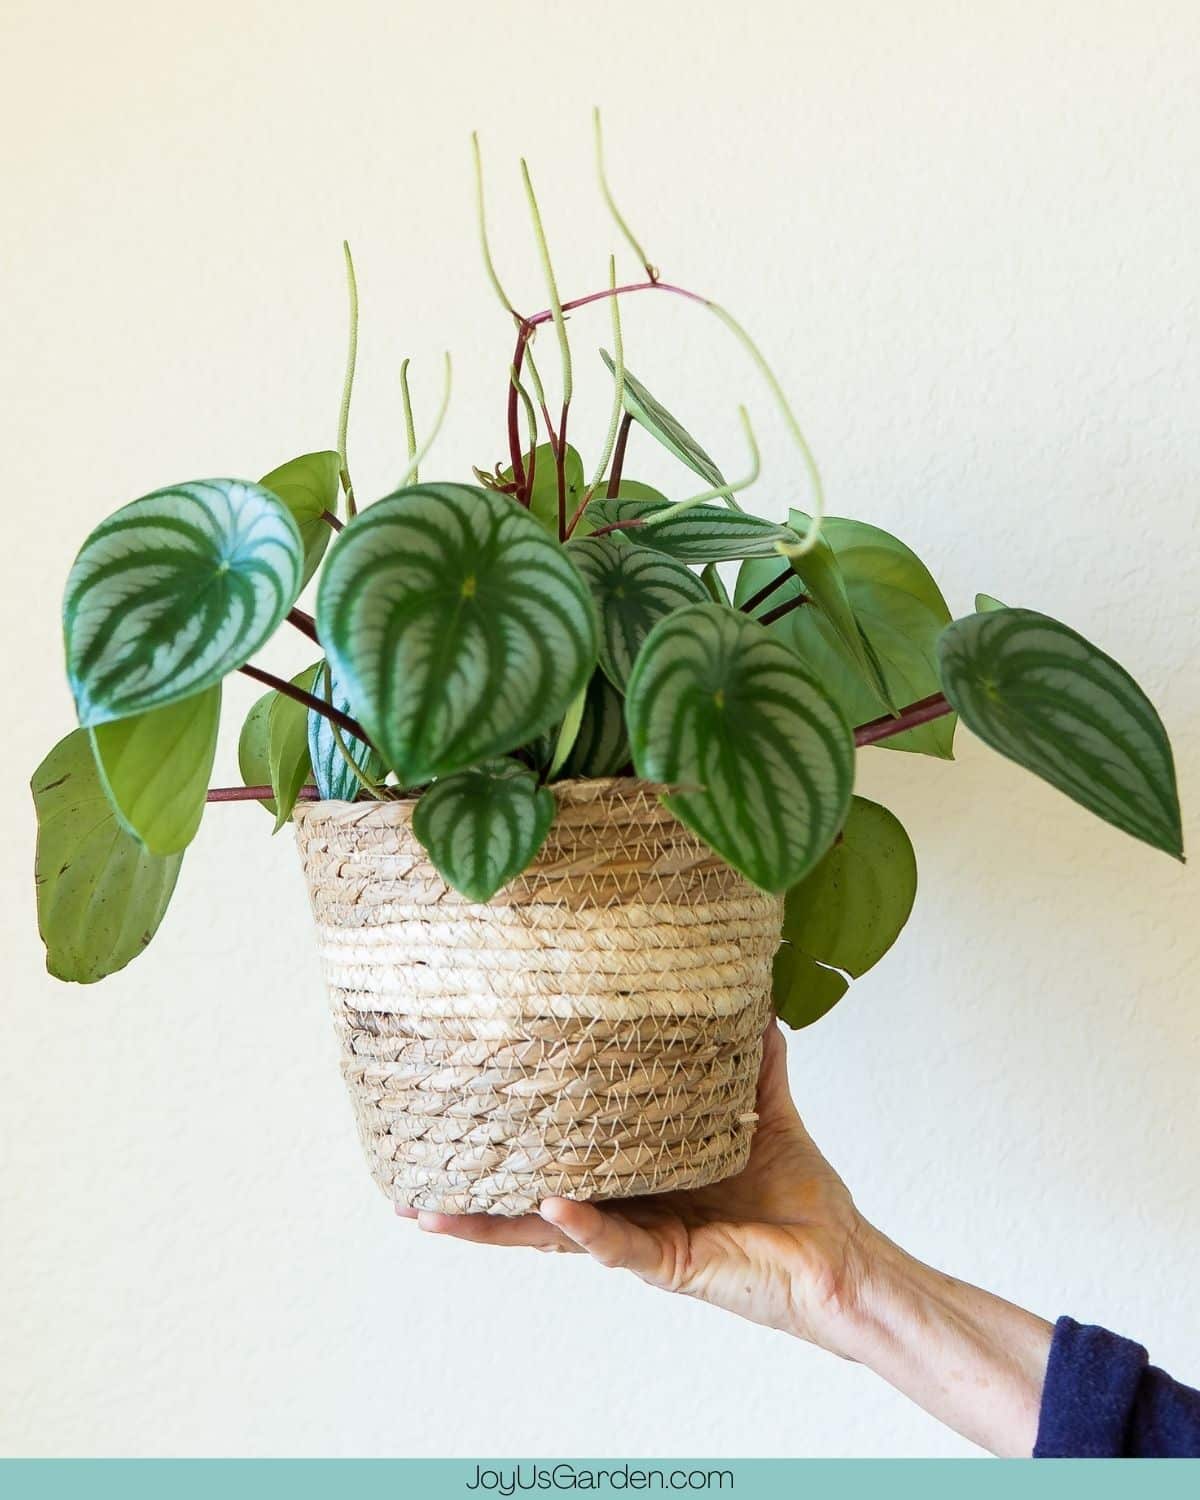 A hand holds a watermelon peperomia in a small rope plant basket.